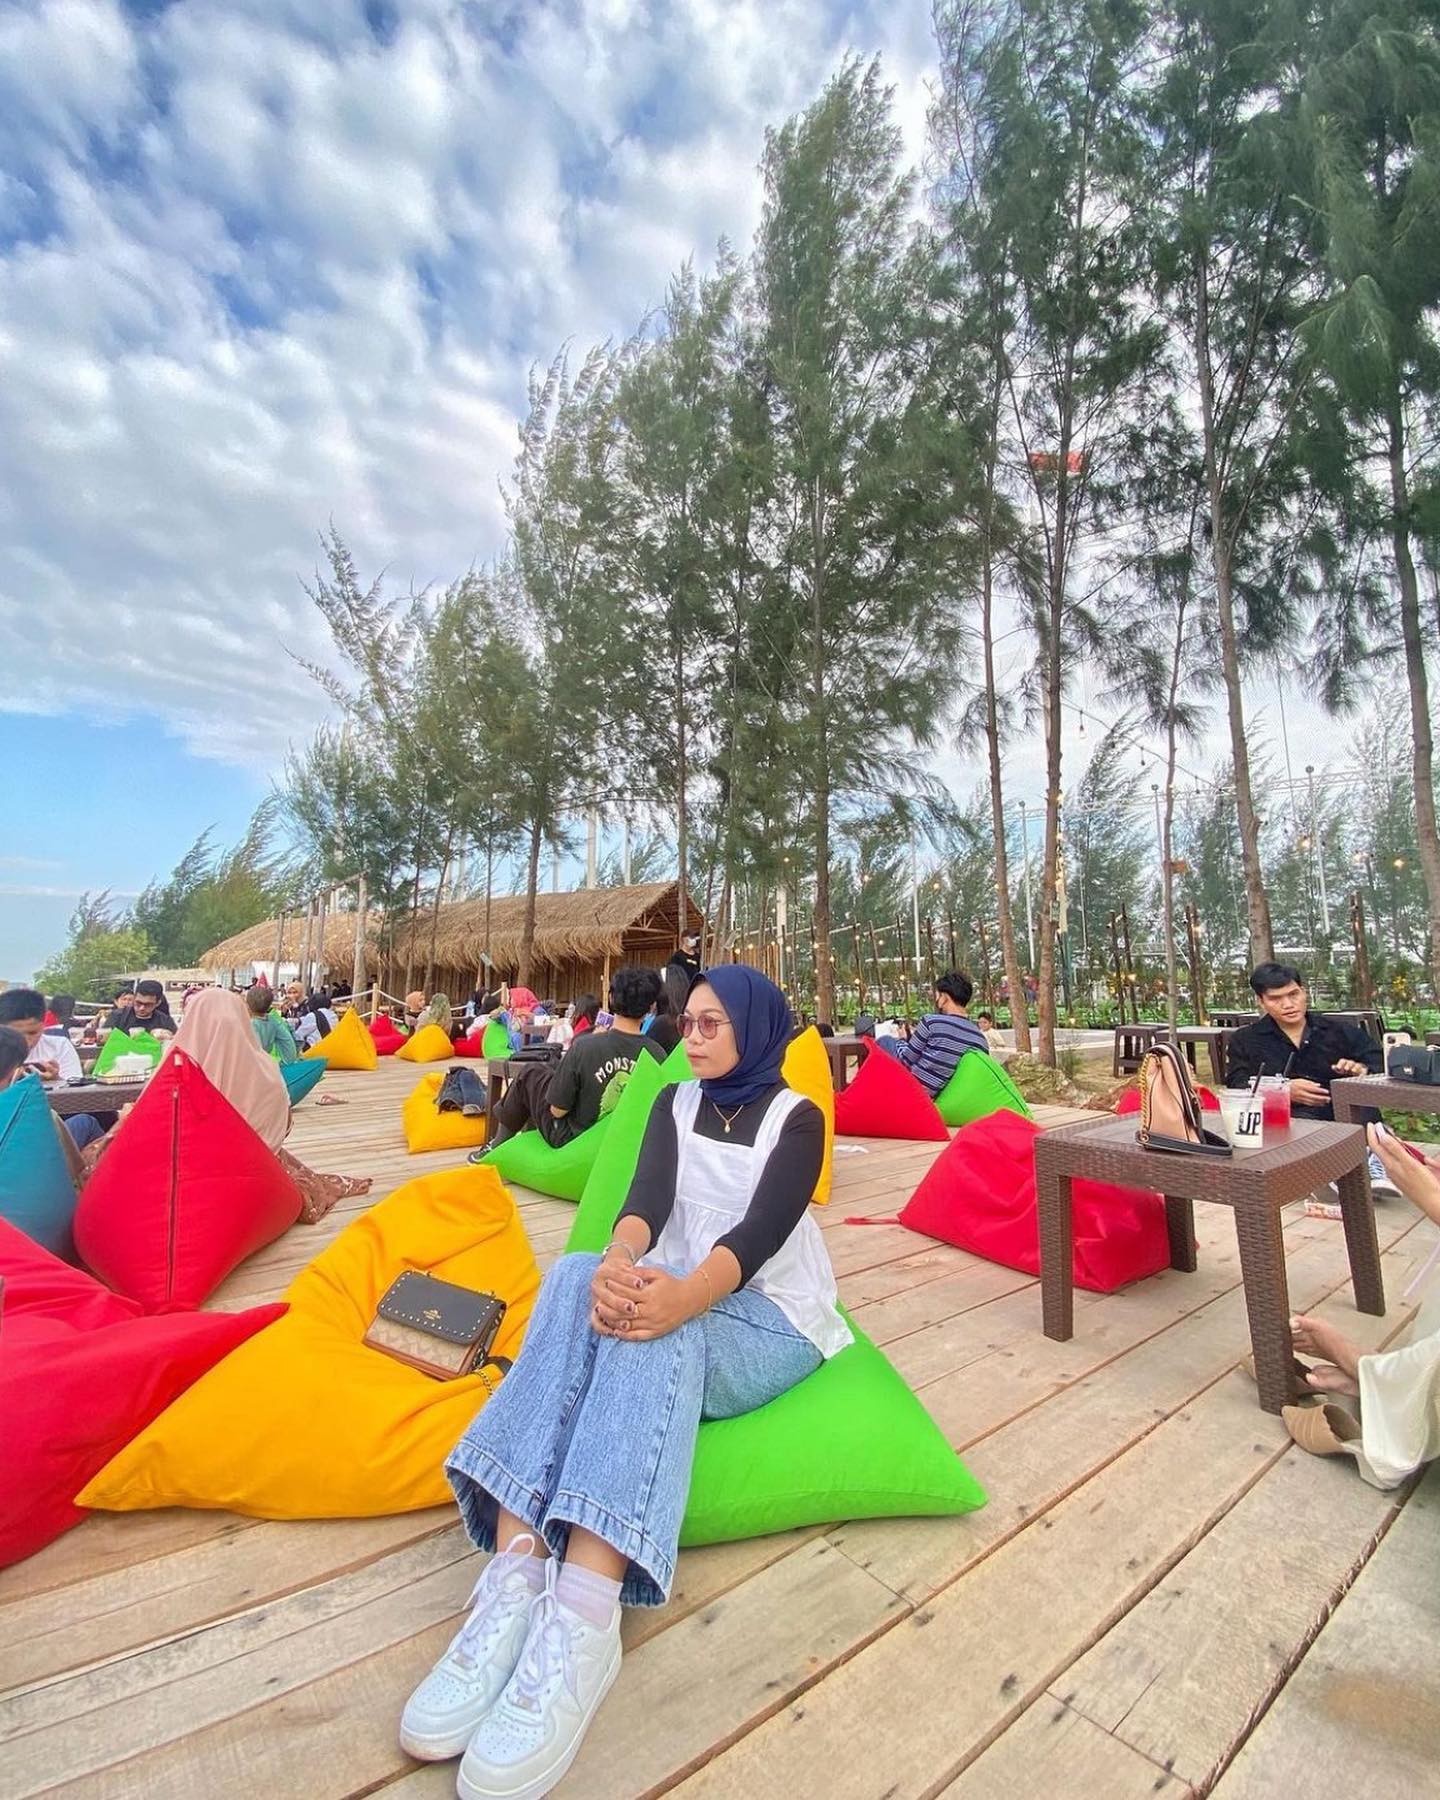 things to do in batam - Level Up Coffee & Floating Bar